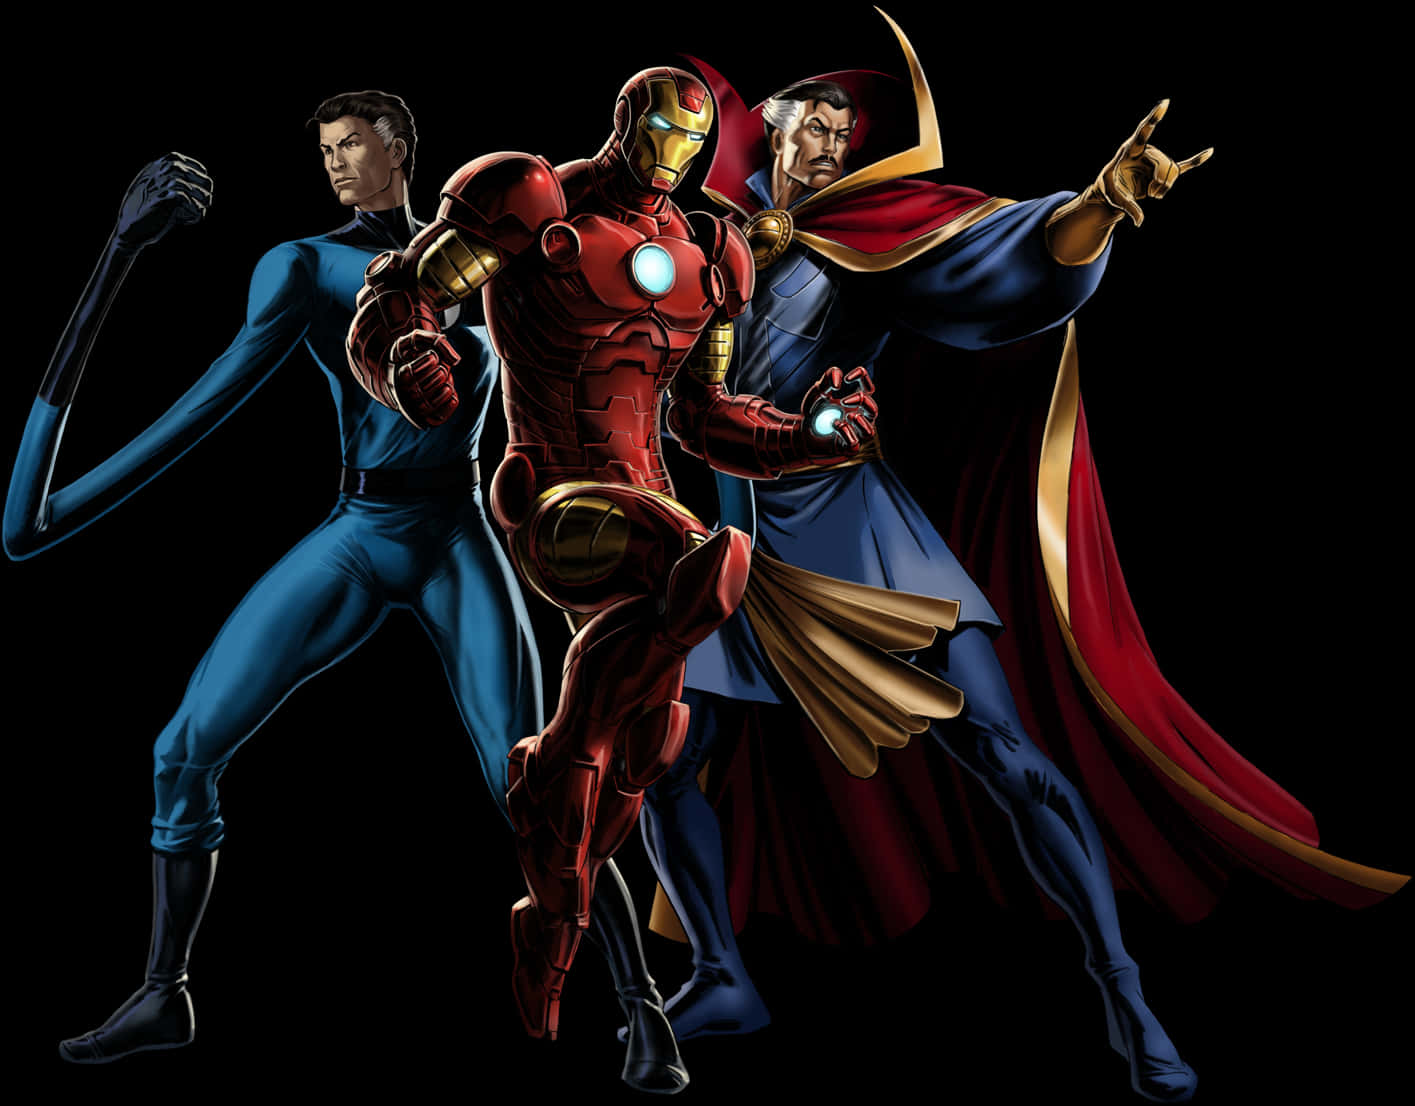 A Group Of Superheroes In Clothing